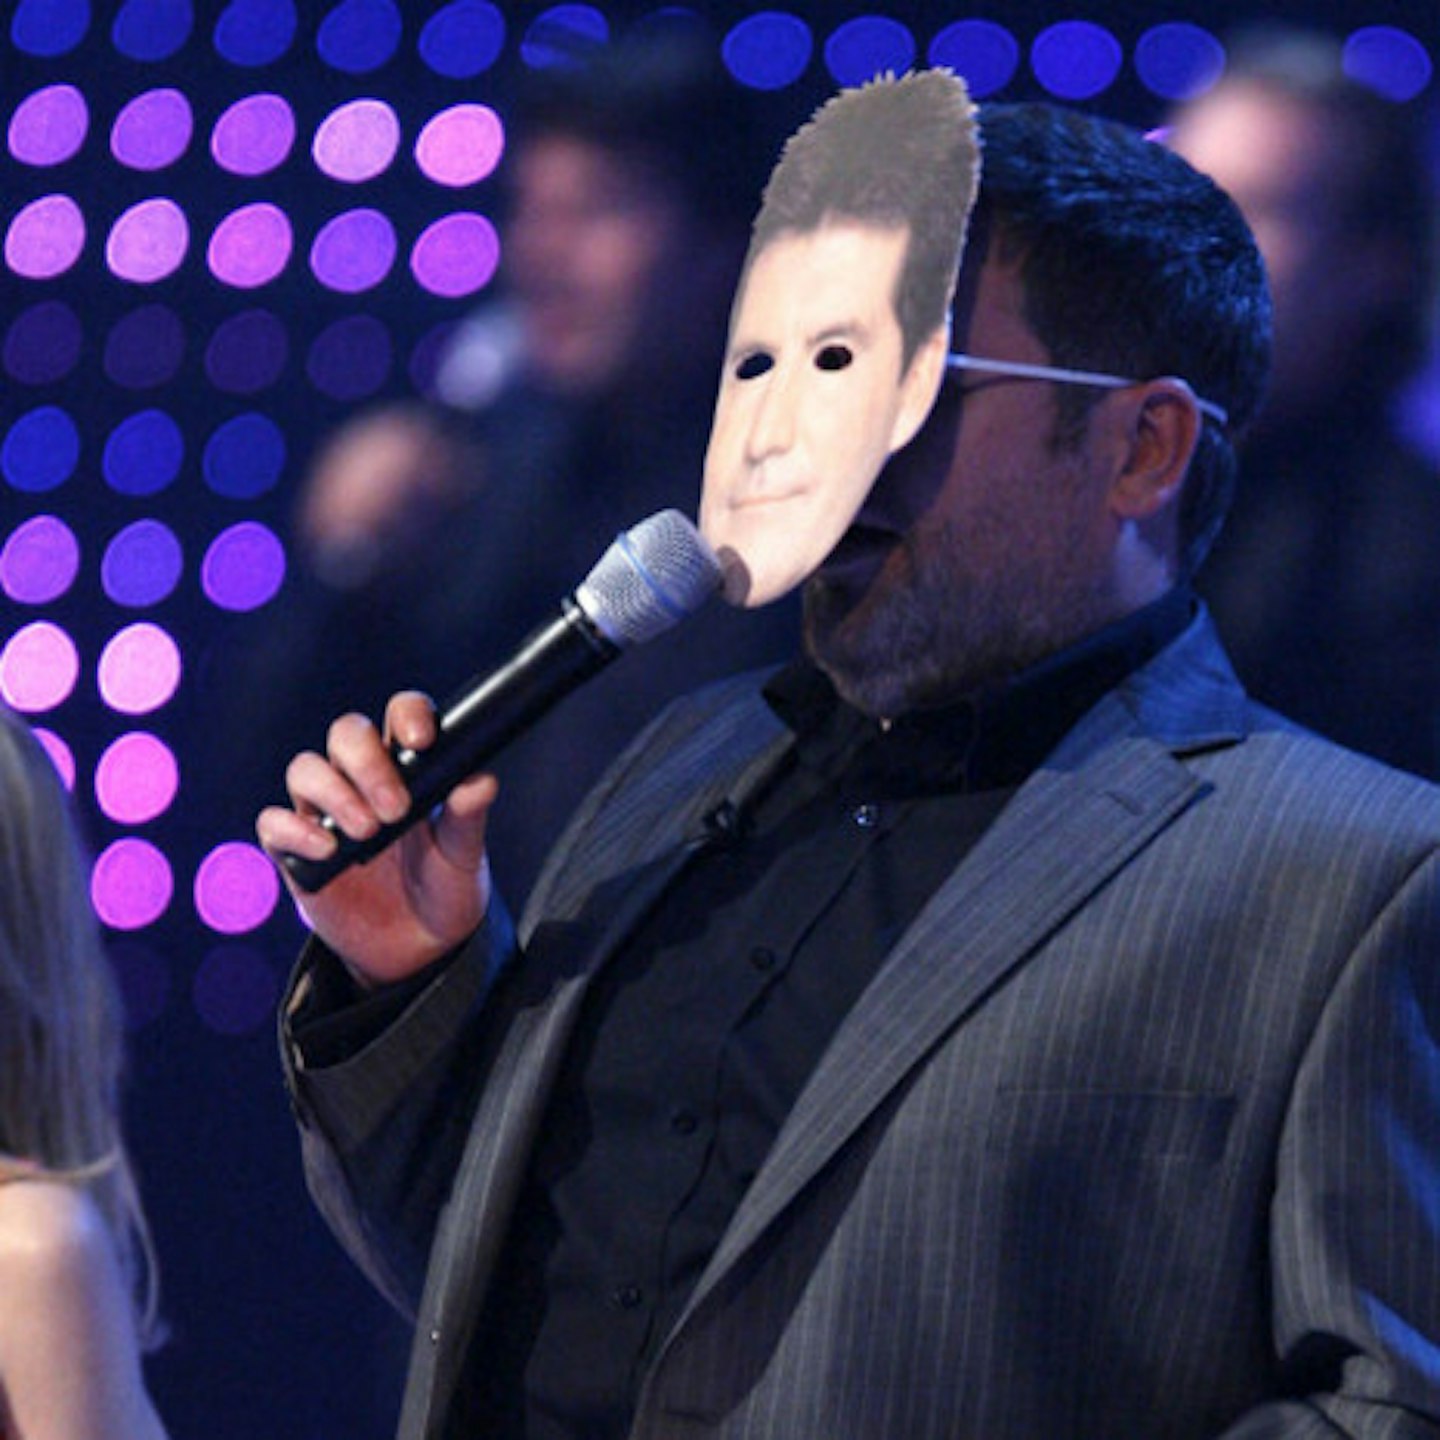 Yes, this is Chris Moyles in a Simon Cowell mask